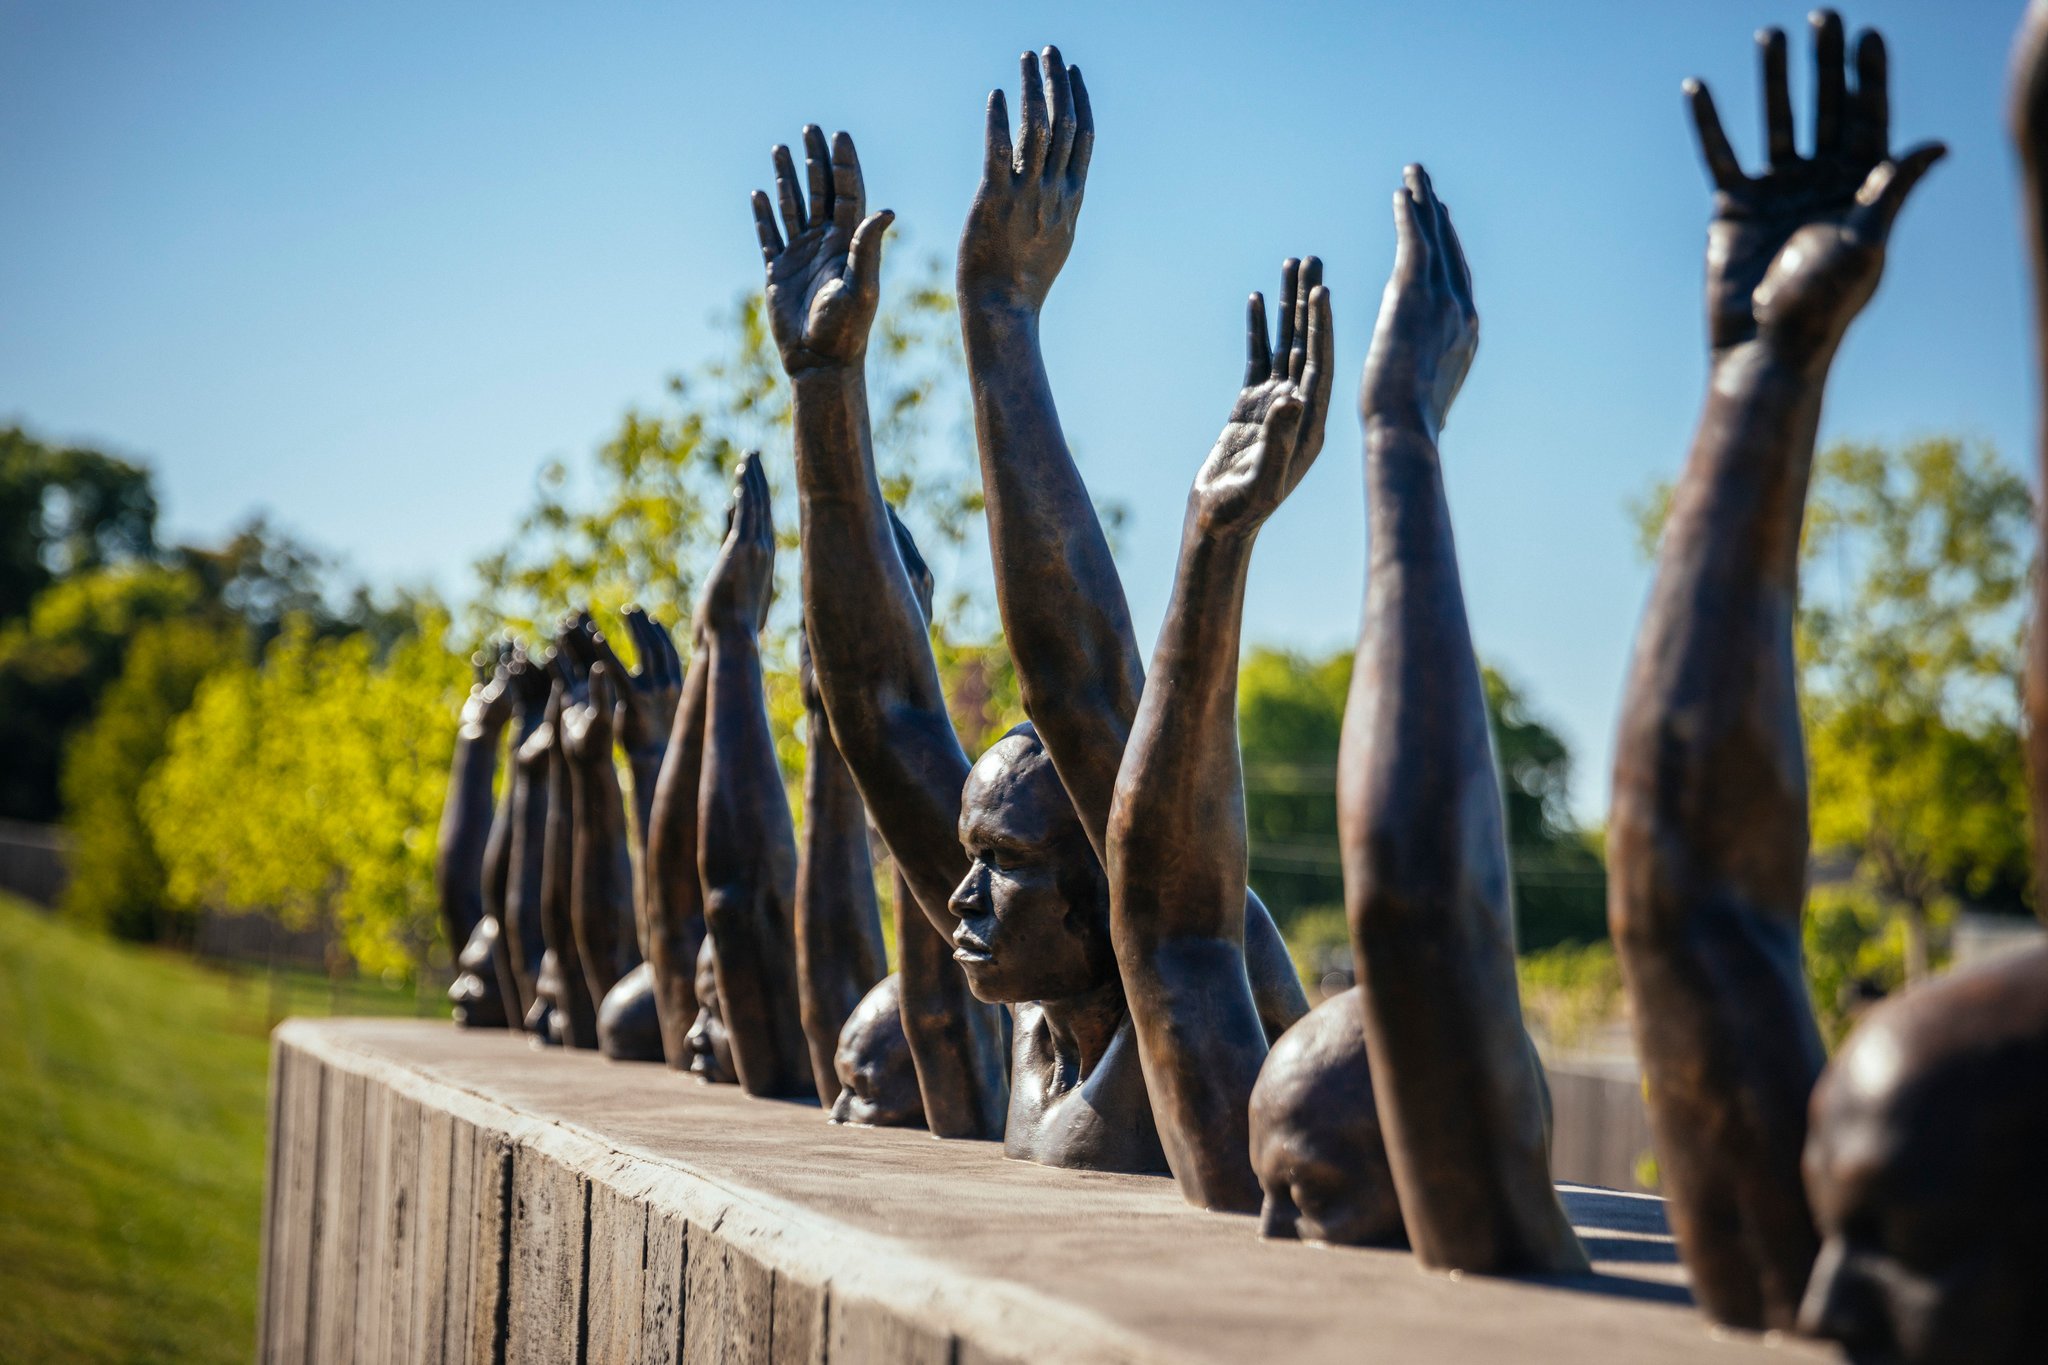 A Lynching Memorial Is Opening.